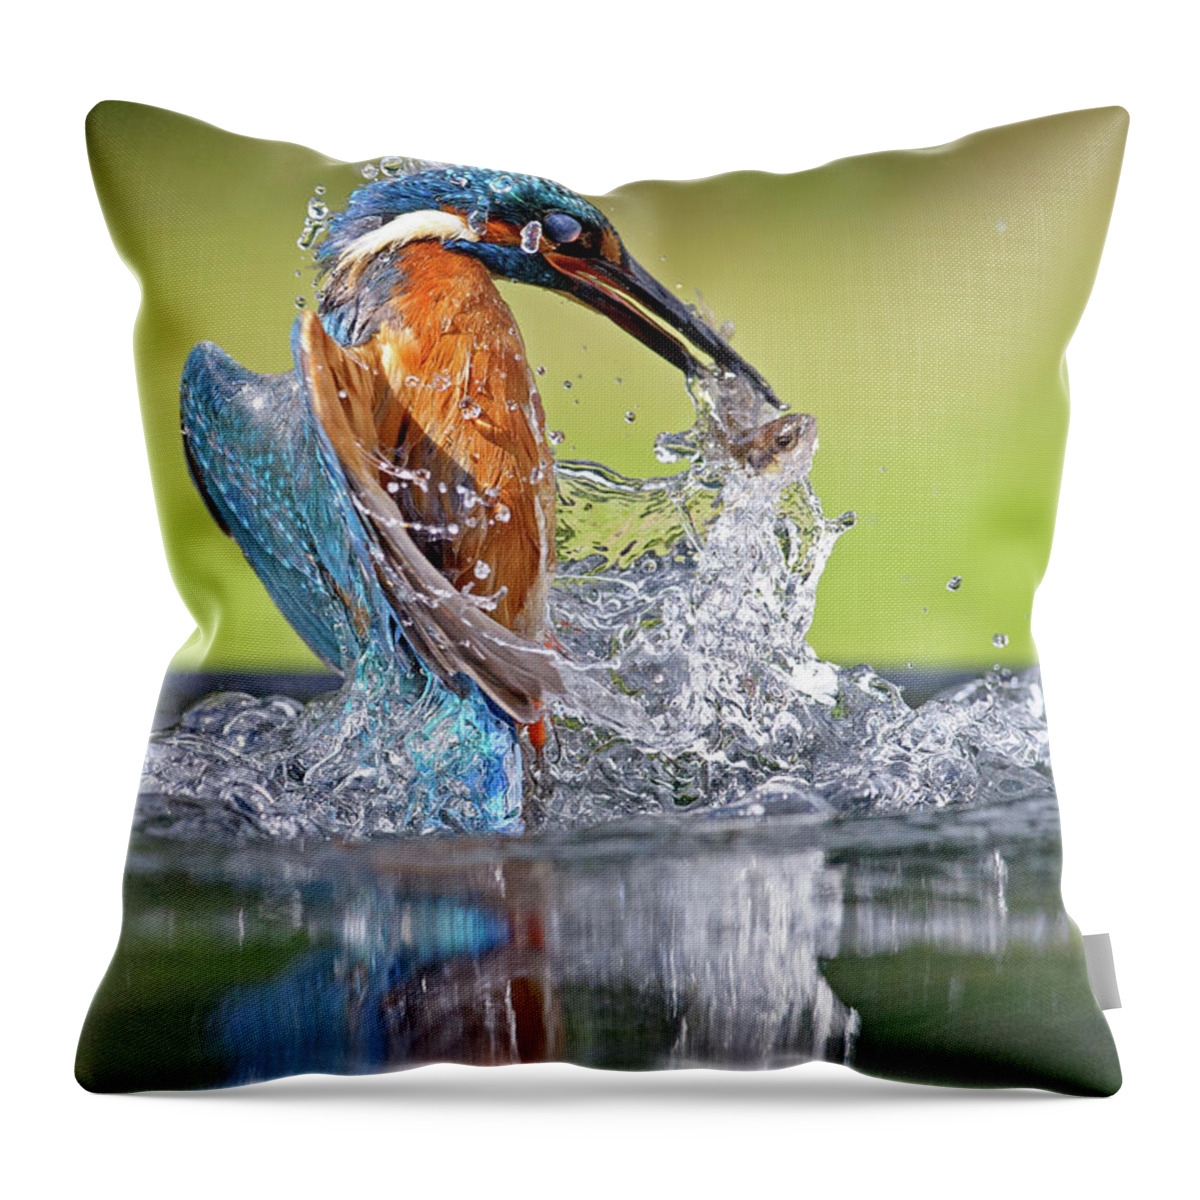 Taking Off Throw Pillow featuring the photograph Kingfisher With Fish by Mark Hughes